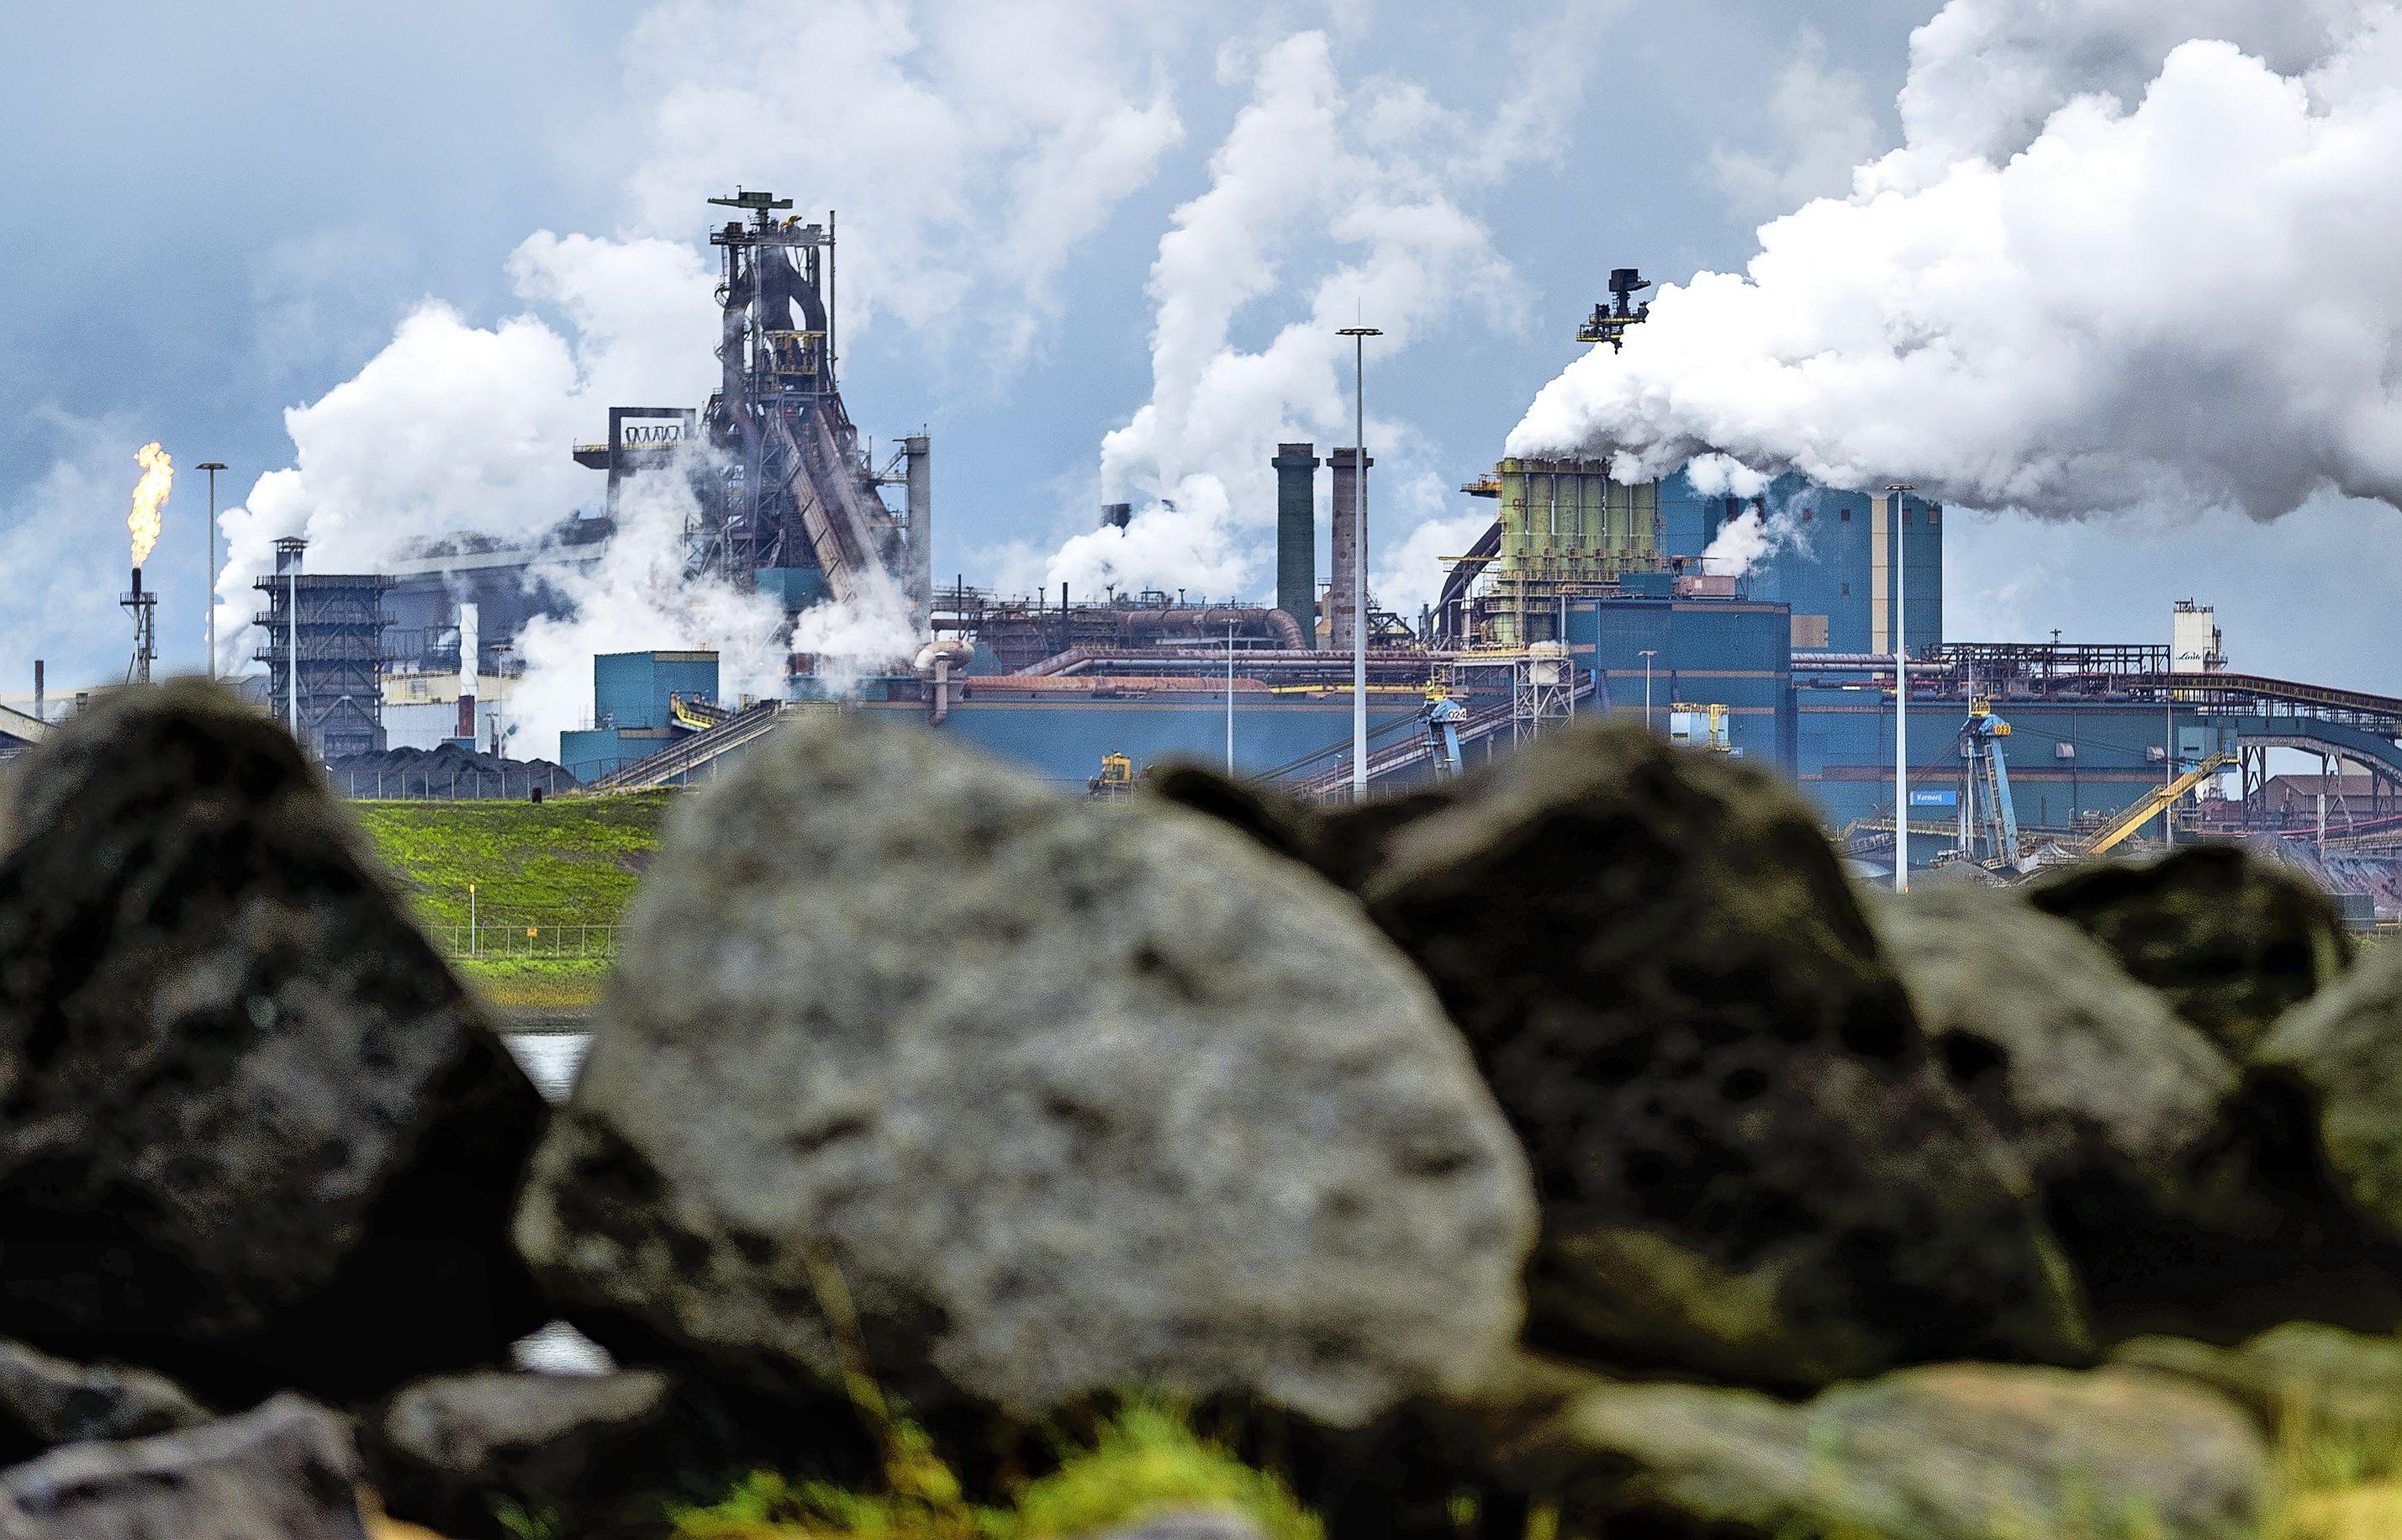 GGD Kennemerland Director Removed Tata Steel from Cancer Report